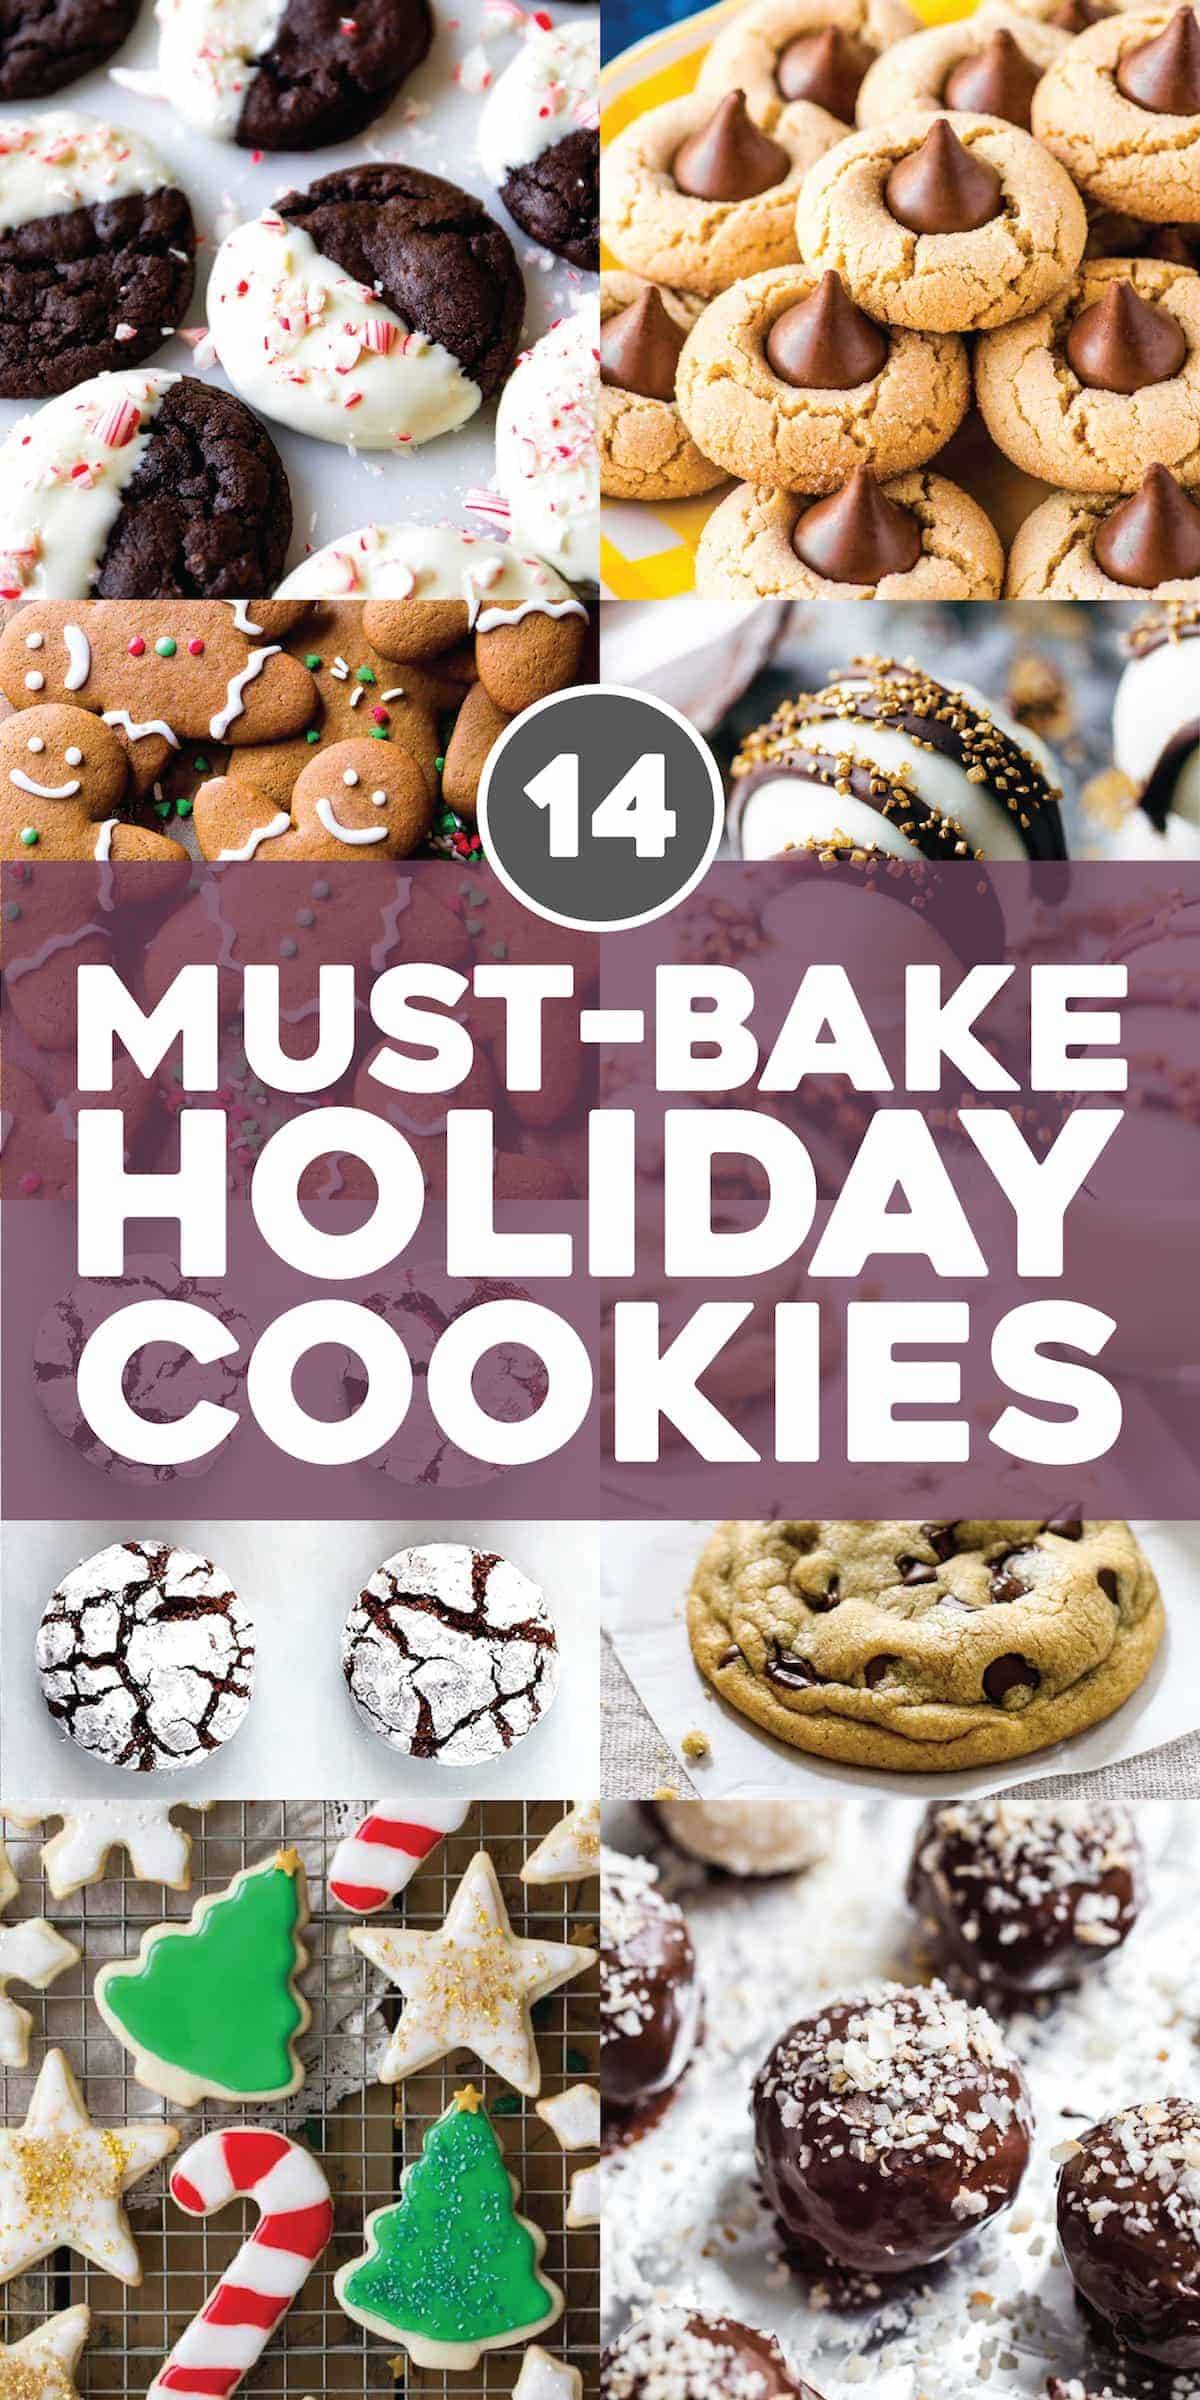 A banner saying "14 MUST-BAKE HOLIDAY COOKIES".